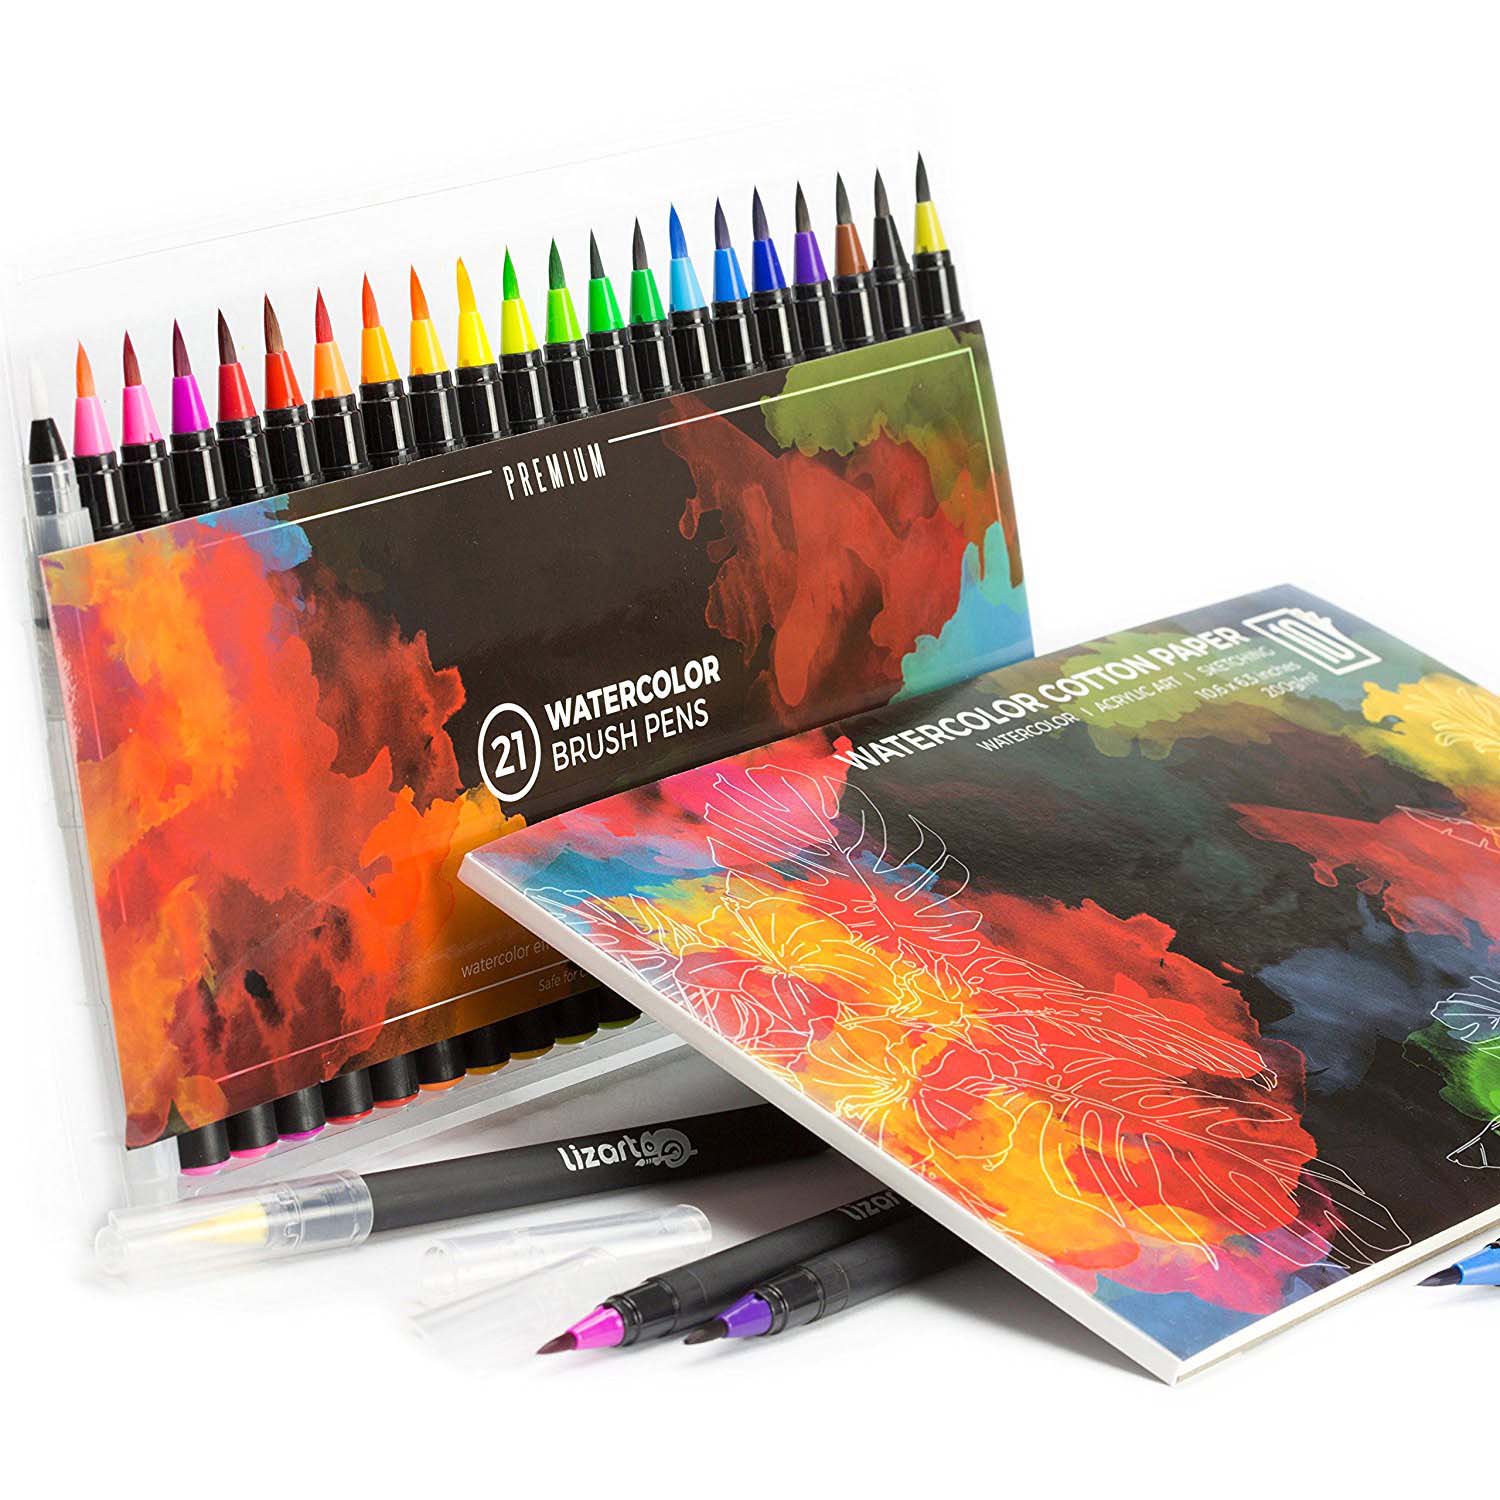 20 colors watercolor brush marker set with drawing pad